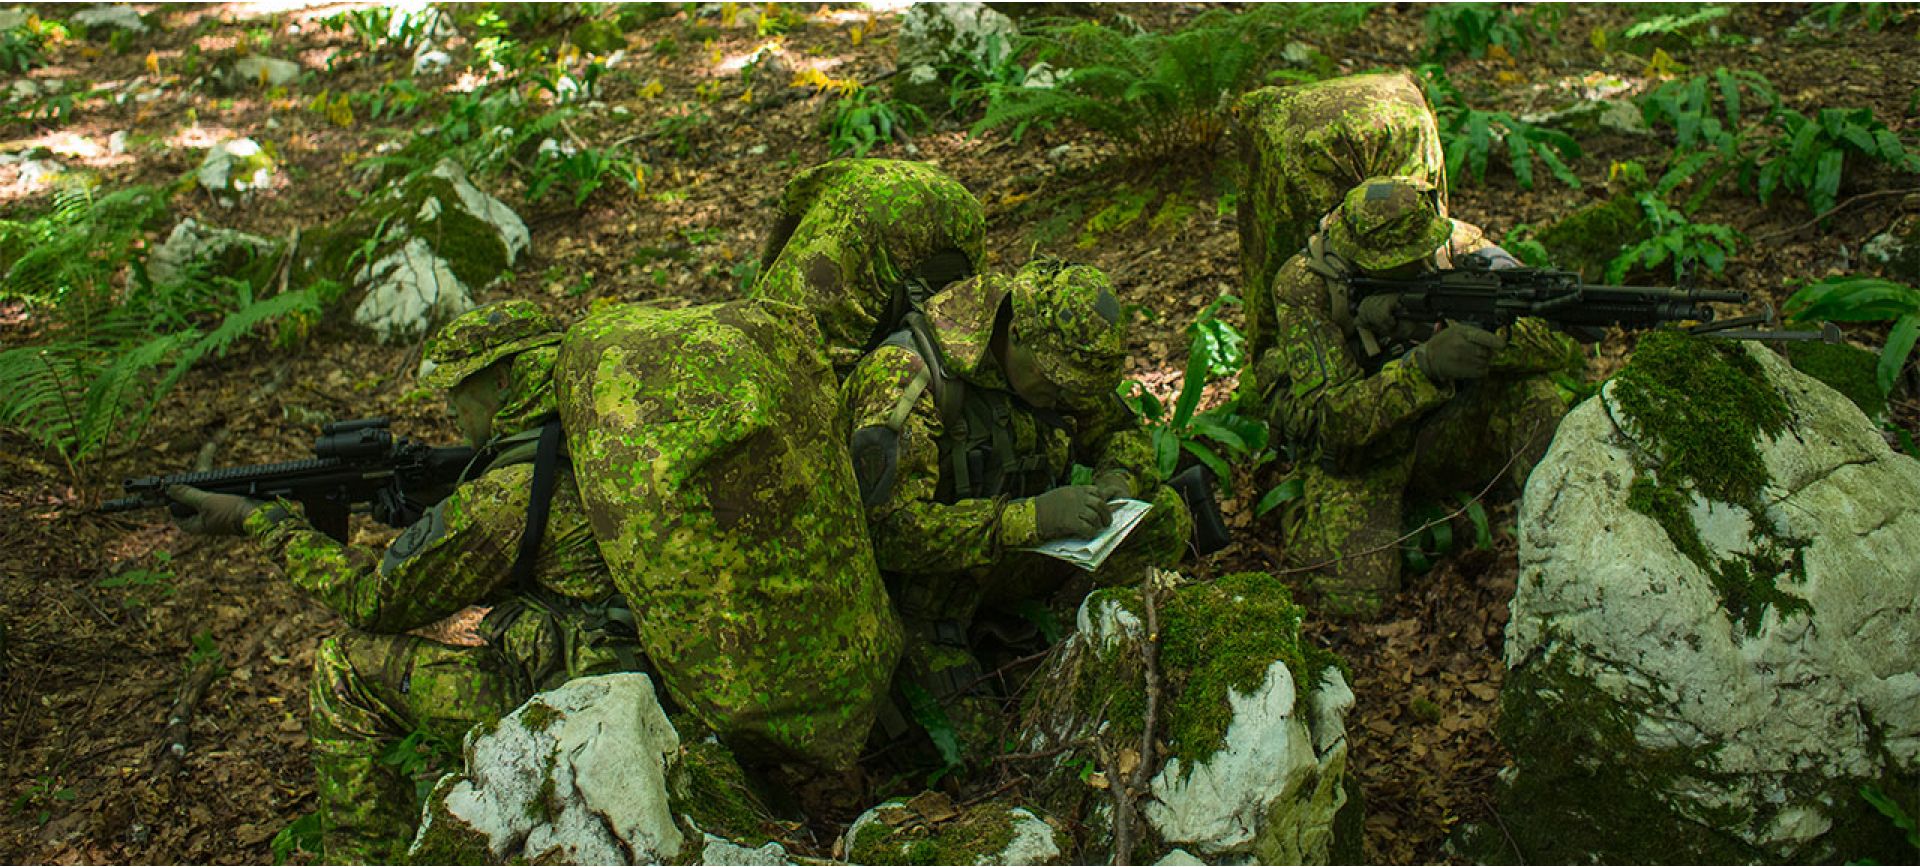 What are The TOP-10 military camouflage patterns?